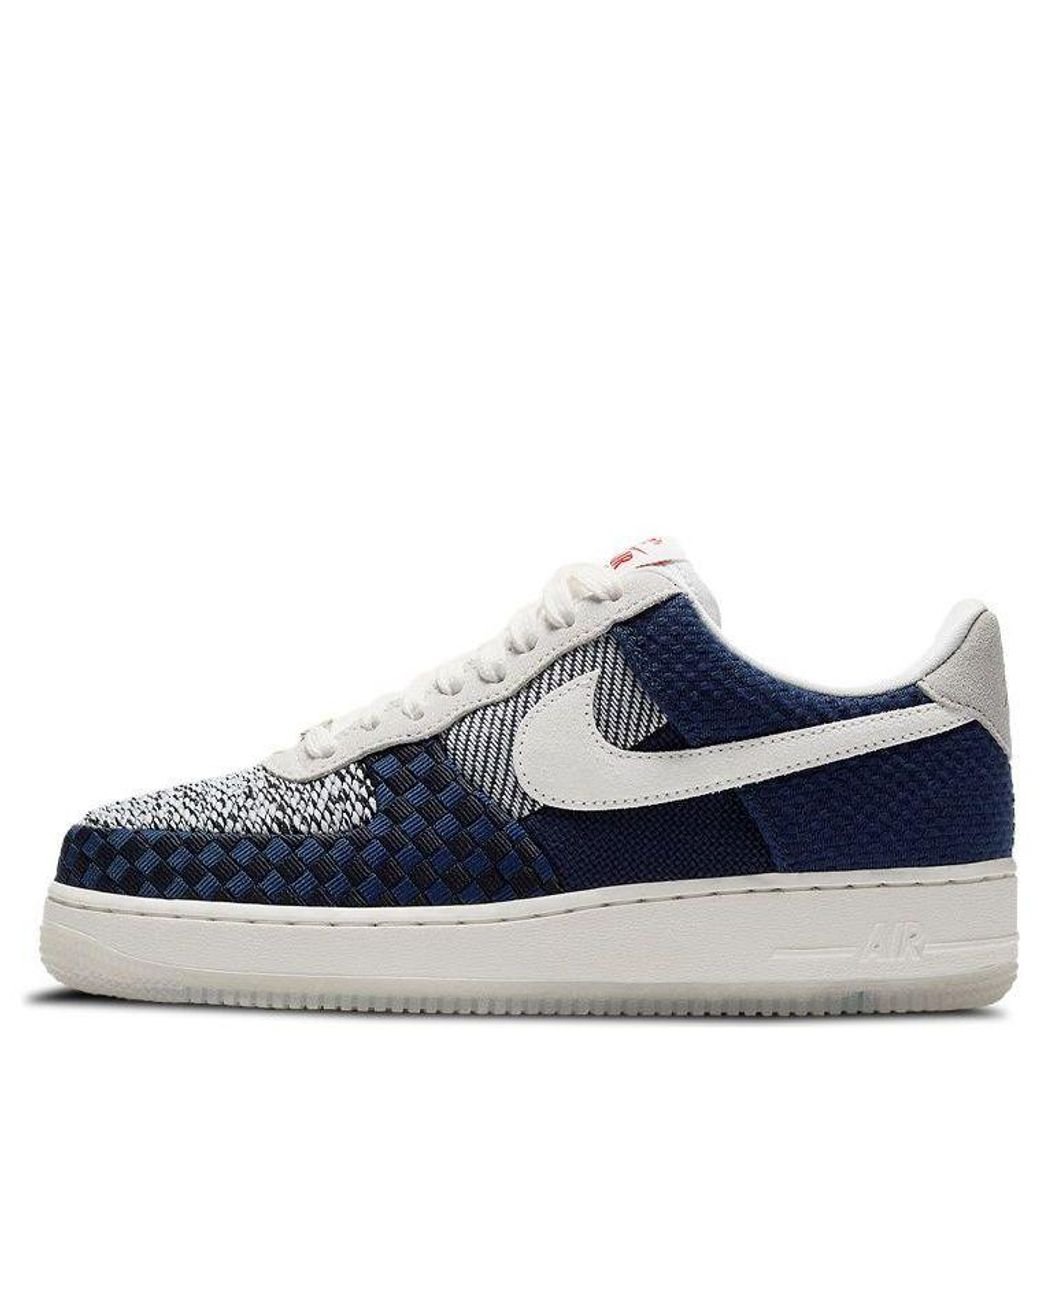 Nike Air Force 1 Sashiko Embroidery For Blue/white | Lyst